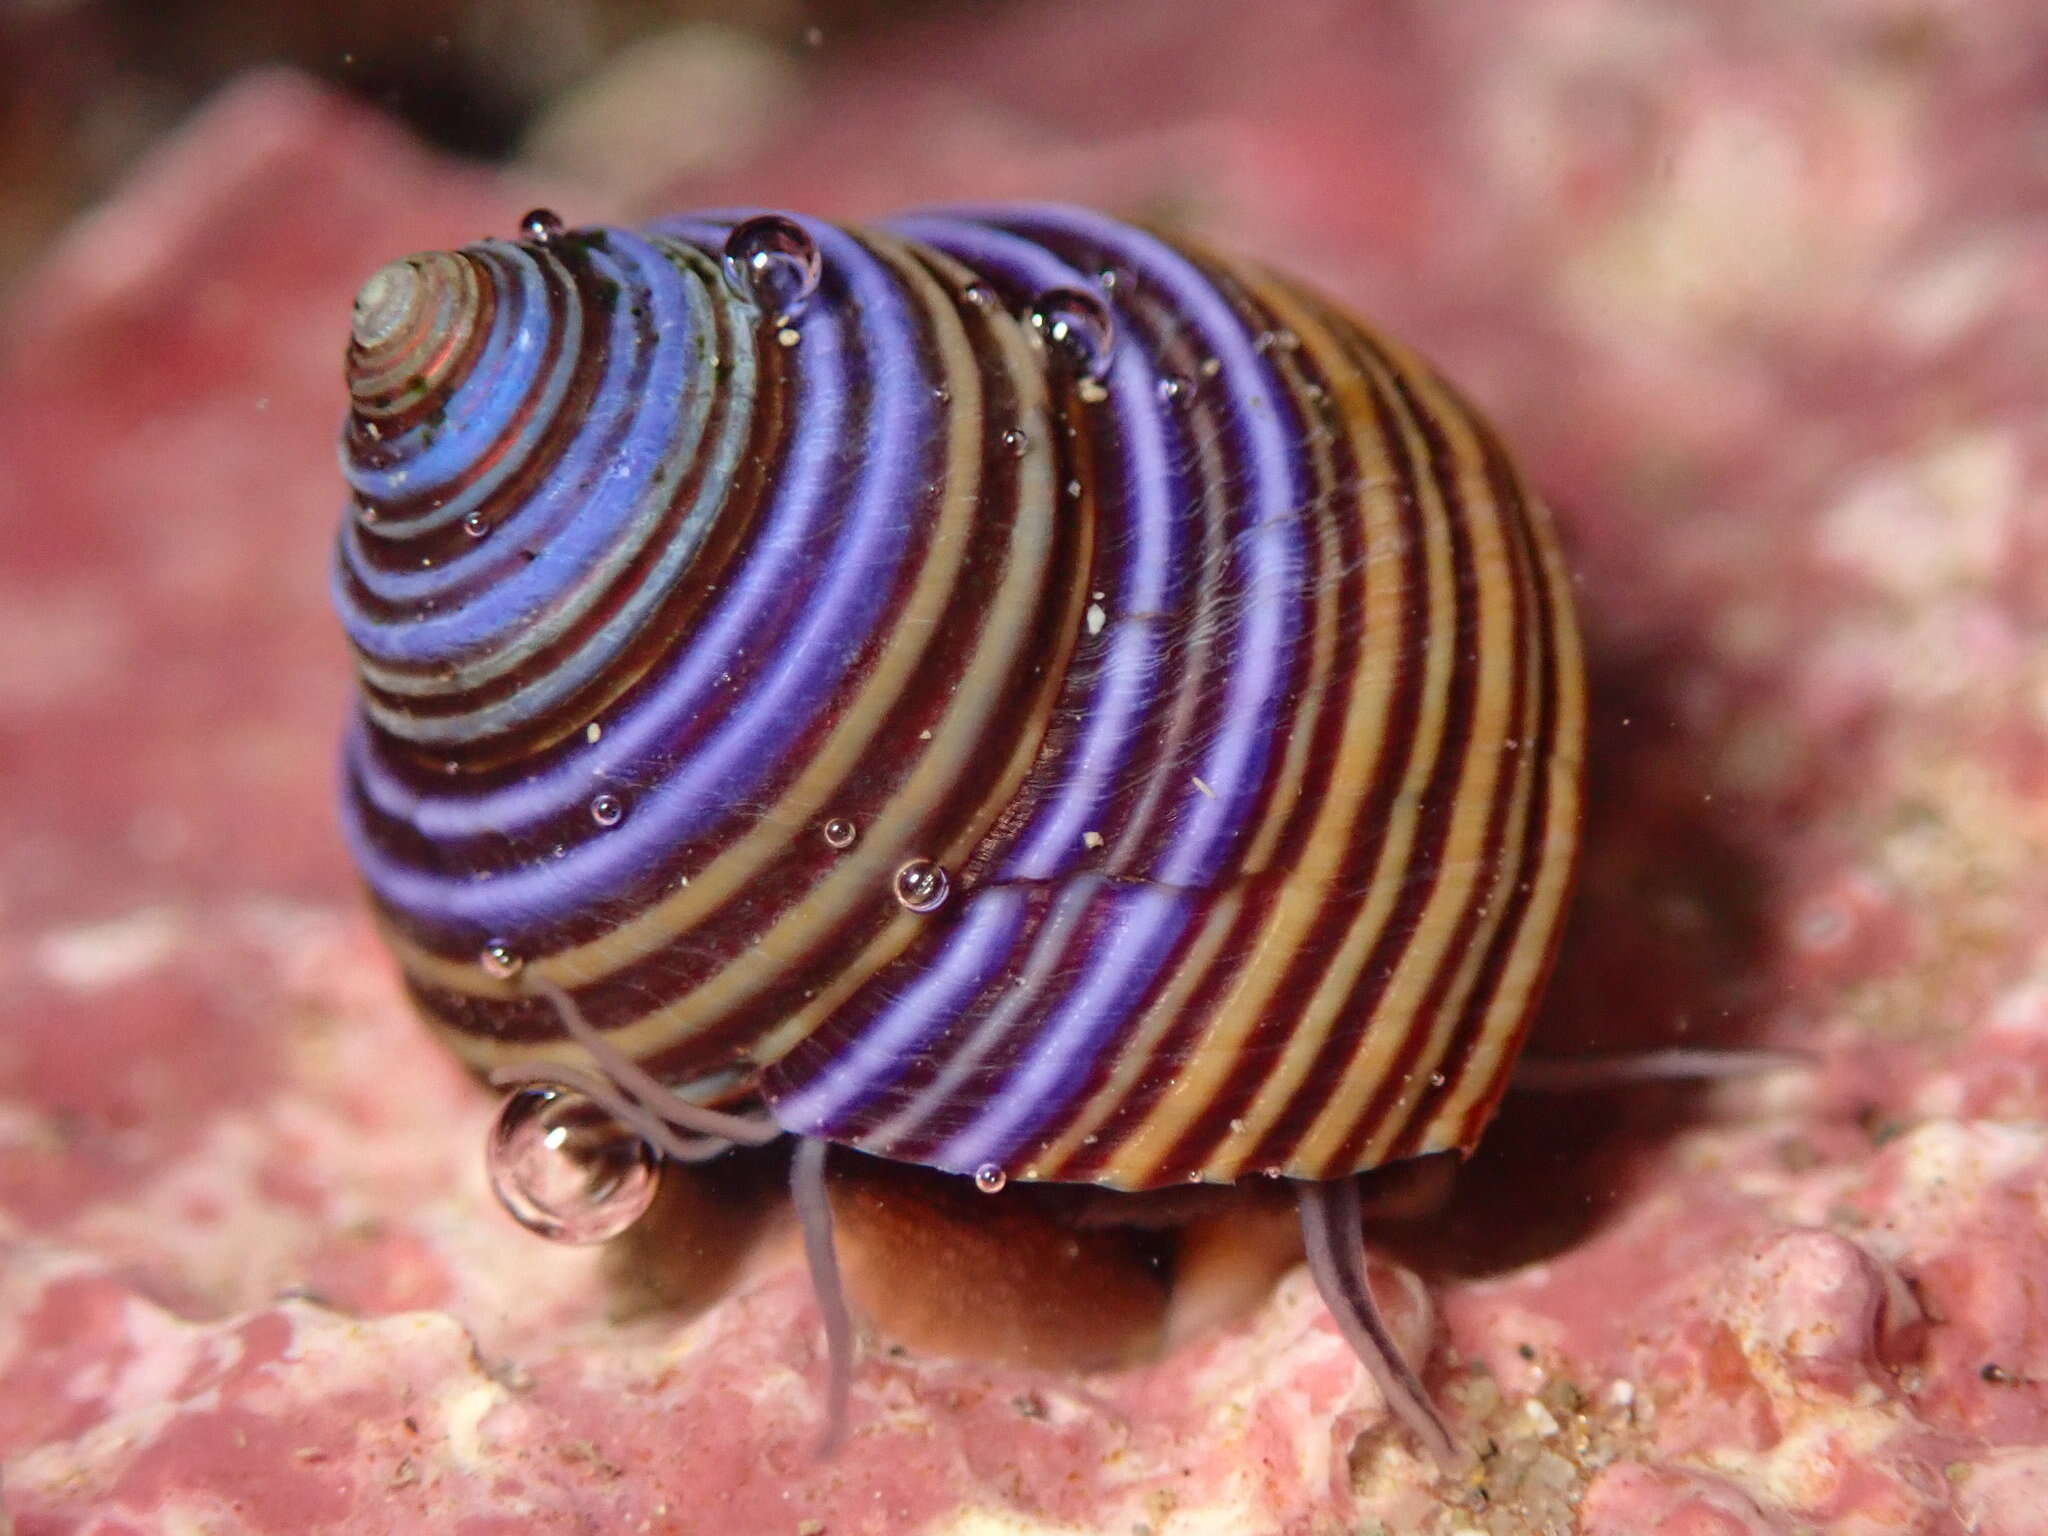 Image of Blue Top Snail